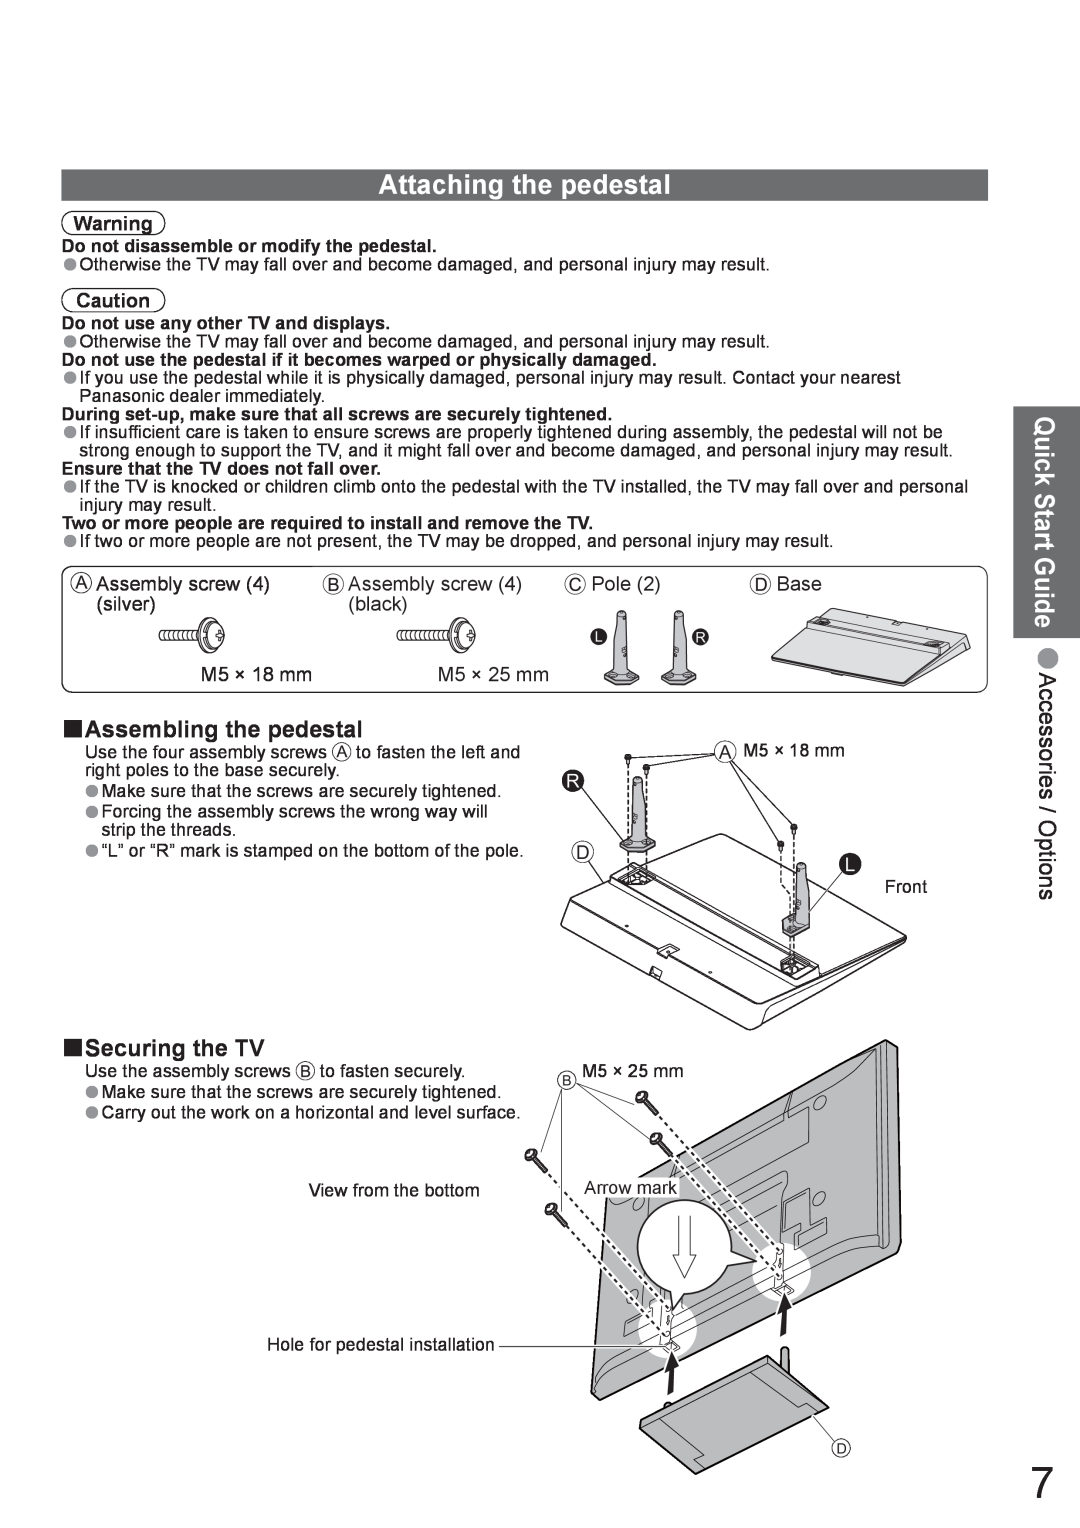 Panasonic TH-42PX8A Attaching the pedestal, Quick Start Guide, Assembling the pedestal, Accessories / Options, Pole, Base 